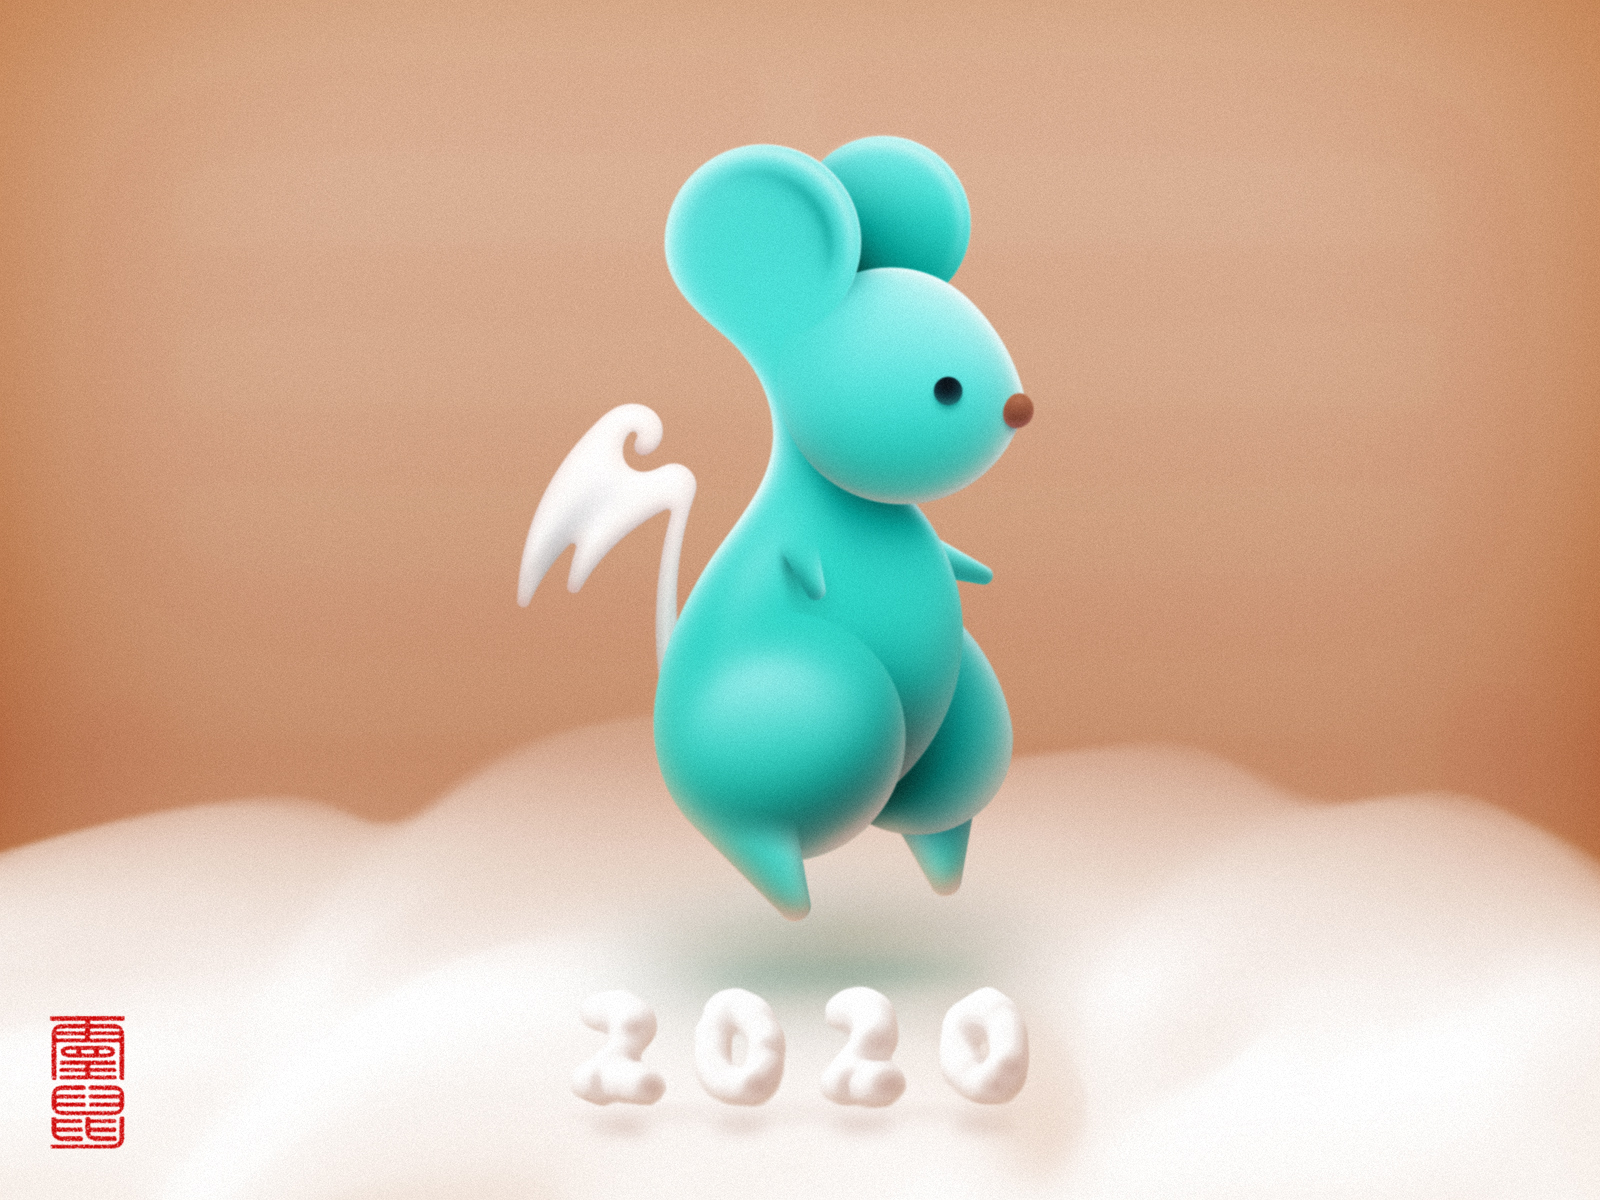 Wallpaper for 2020 Year of the Rat 灵鼠 2020 2020 year character chinese new year cloud download elf rat free happy new year icon illuatration mouse os icon rat realistic sandor smartisan spirit mouse spirit rat wallpaper